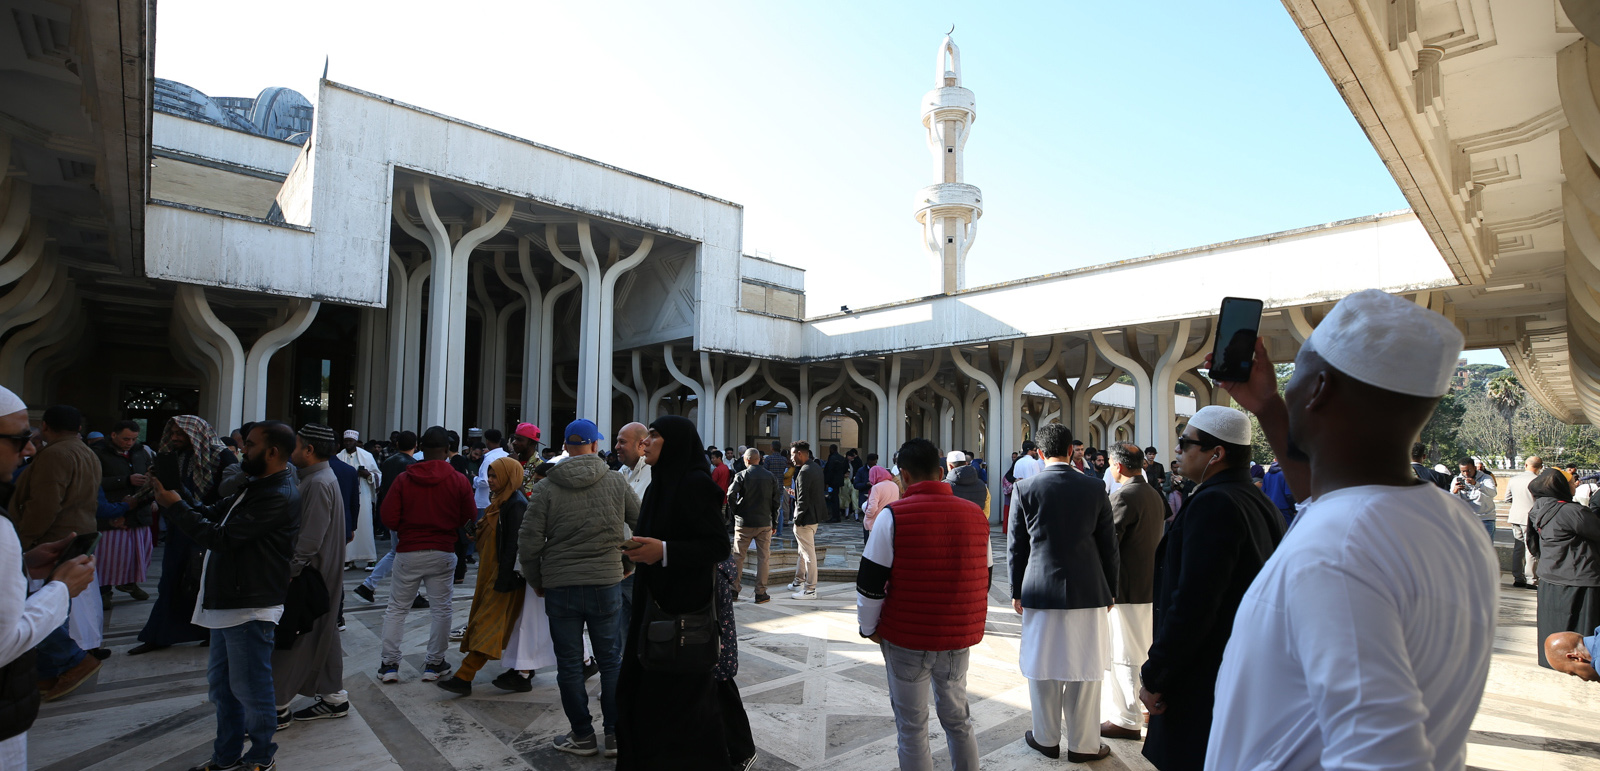 Congregants roam around courtyard of the Grand Mosque of Rome, pictured.